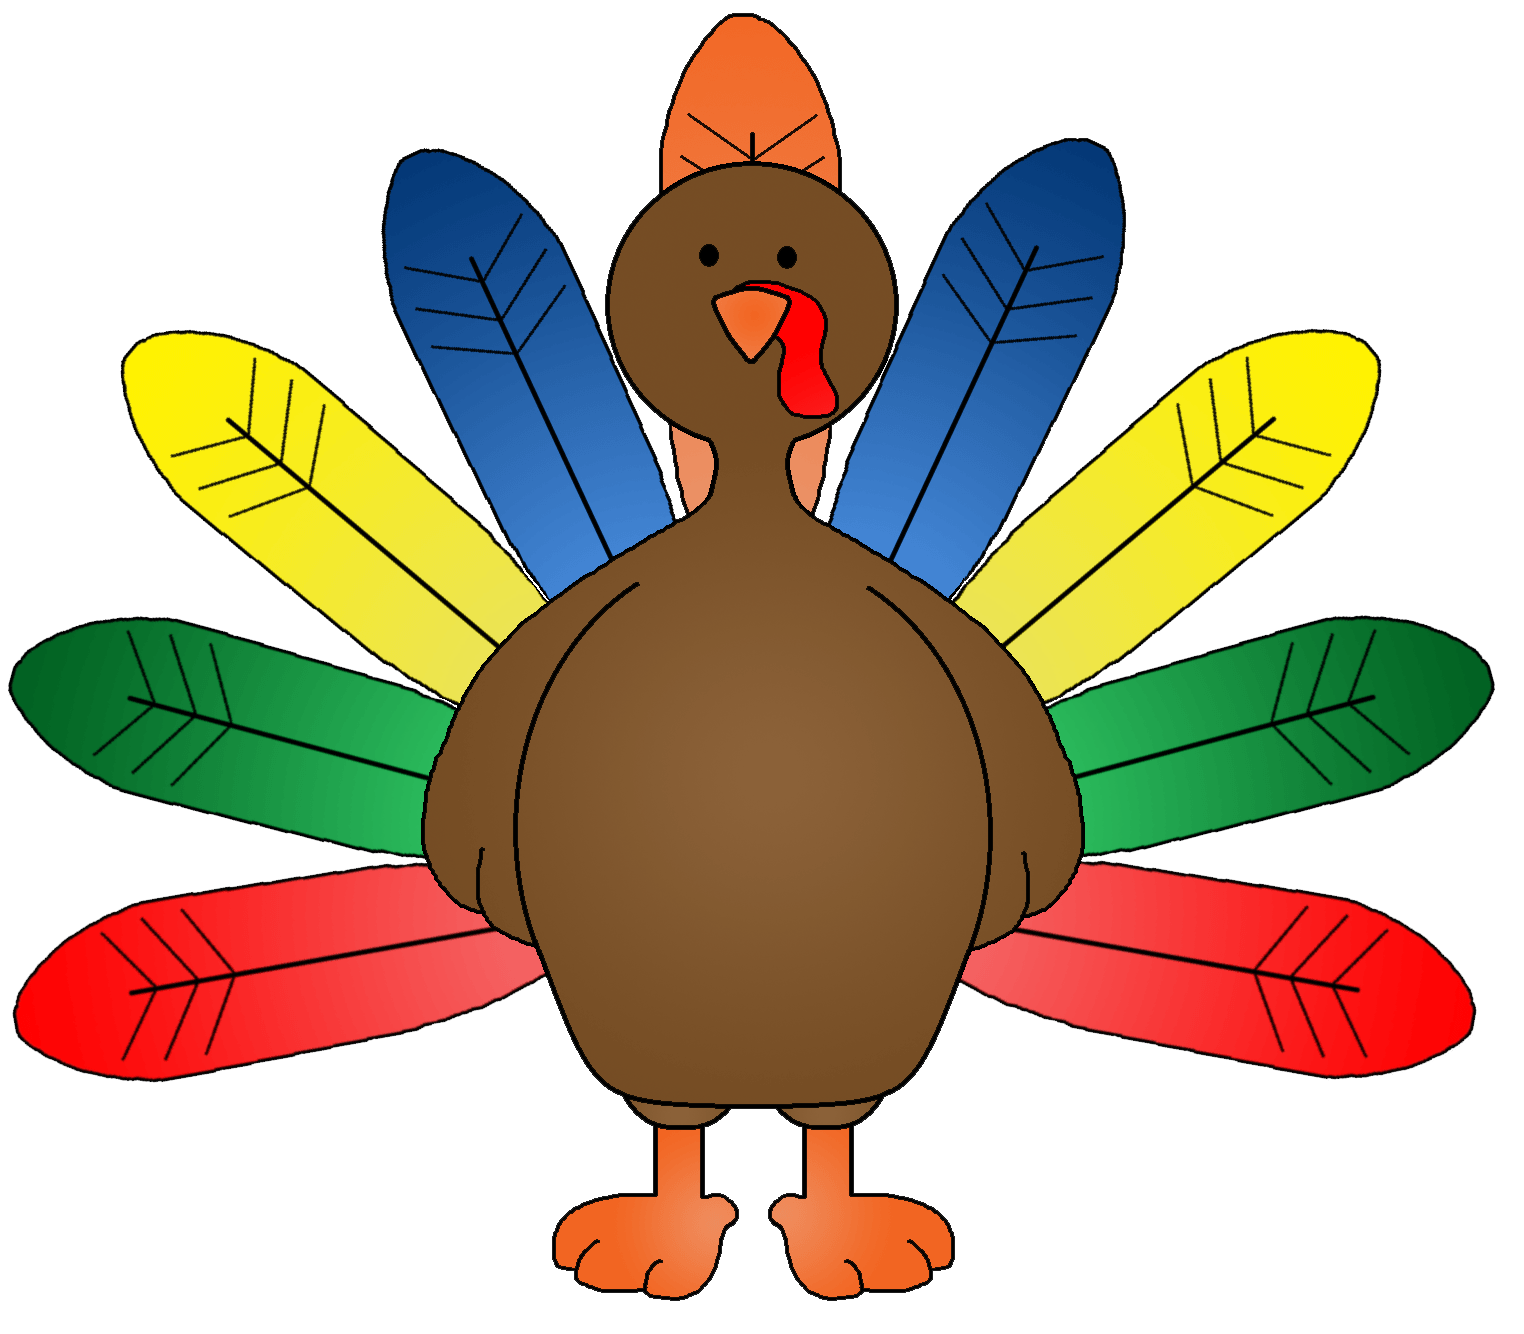 Free Image Of Thanksgiving Turkey, Download Free Clip Art, Free Clip Art on Clipart Library